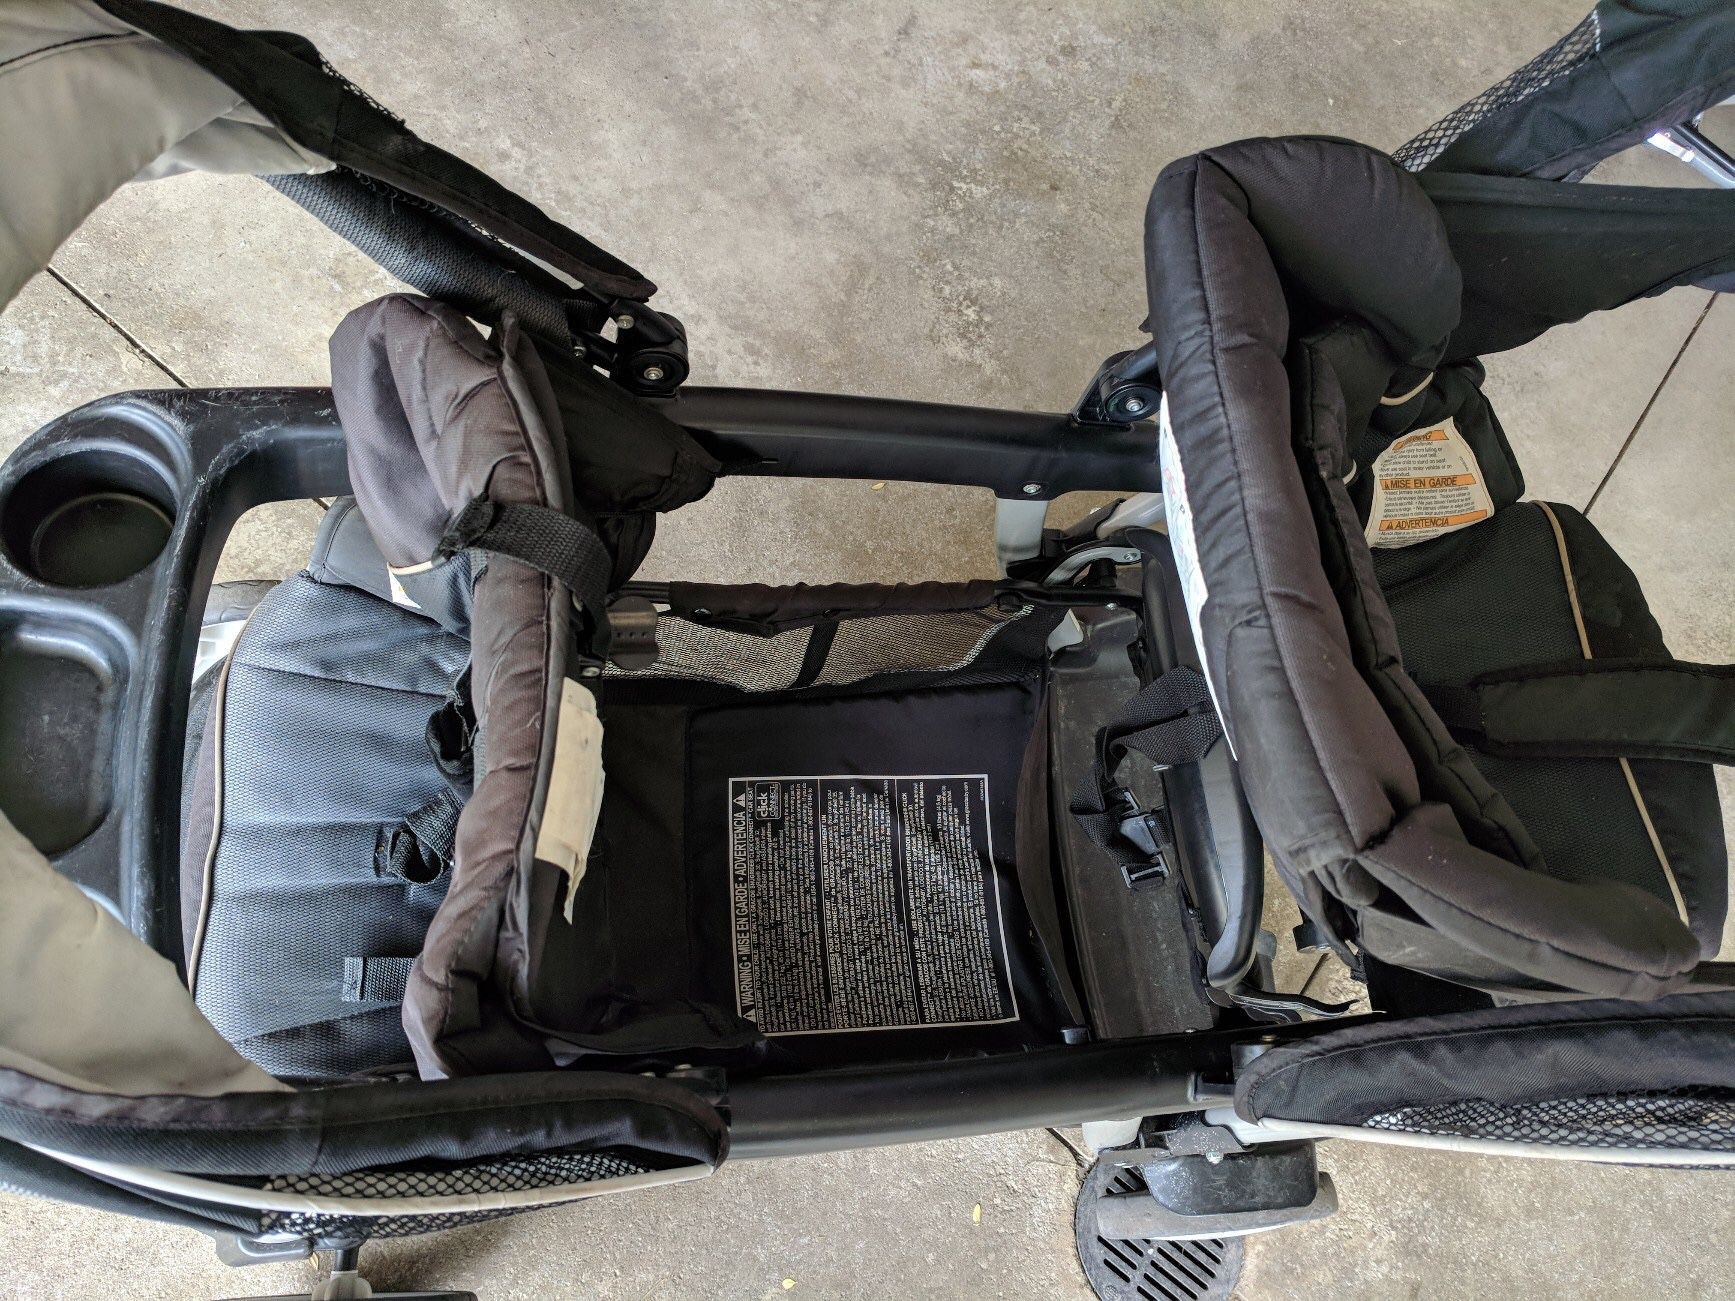 Graco click connect double stroller purchased in 2015 with no recalls asking price $75.00